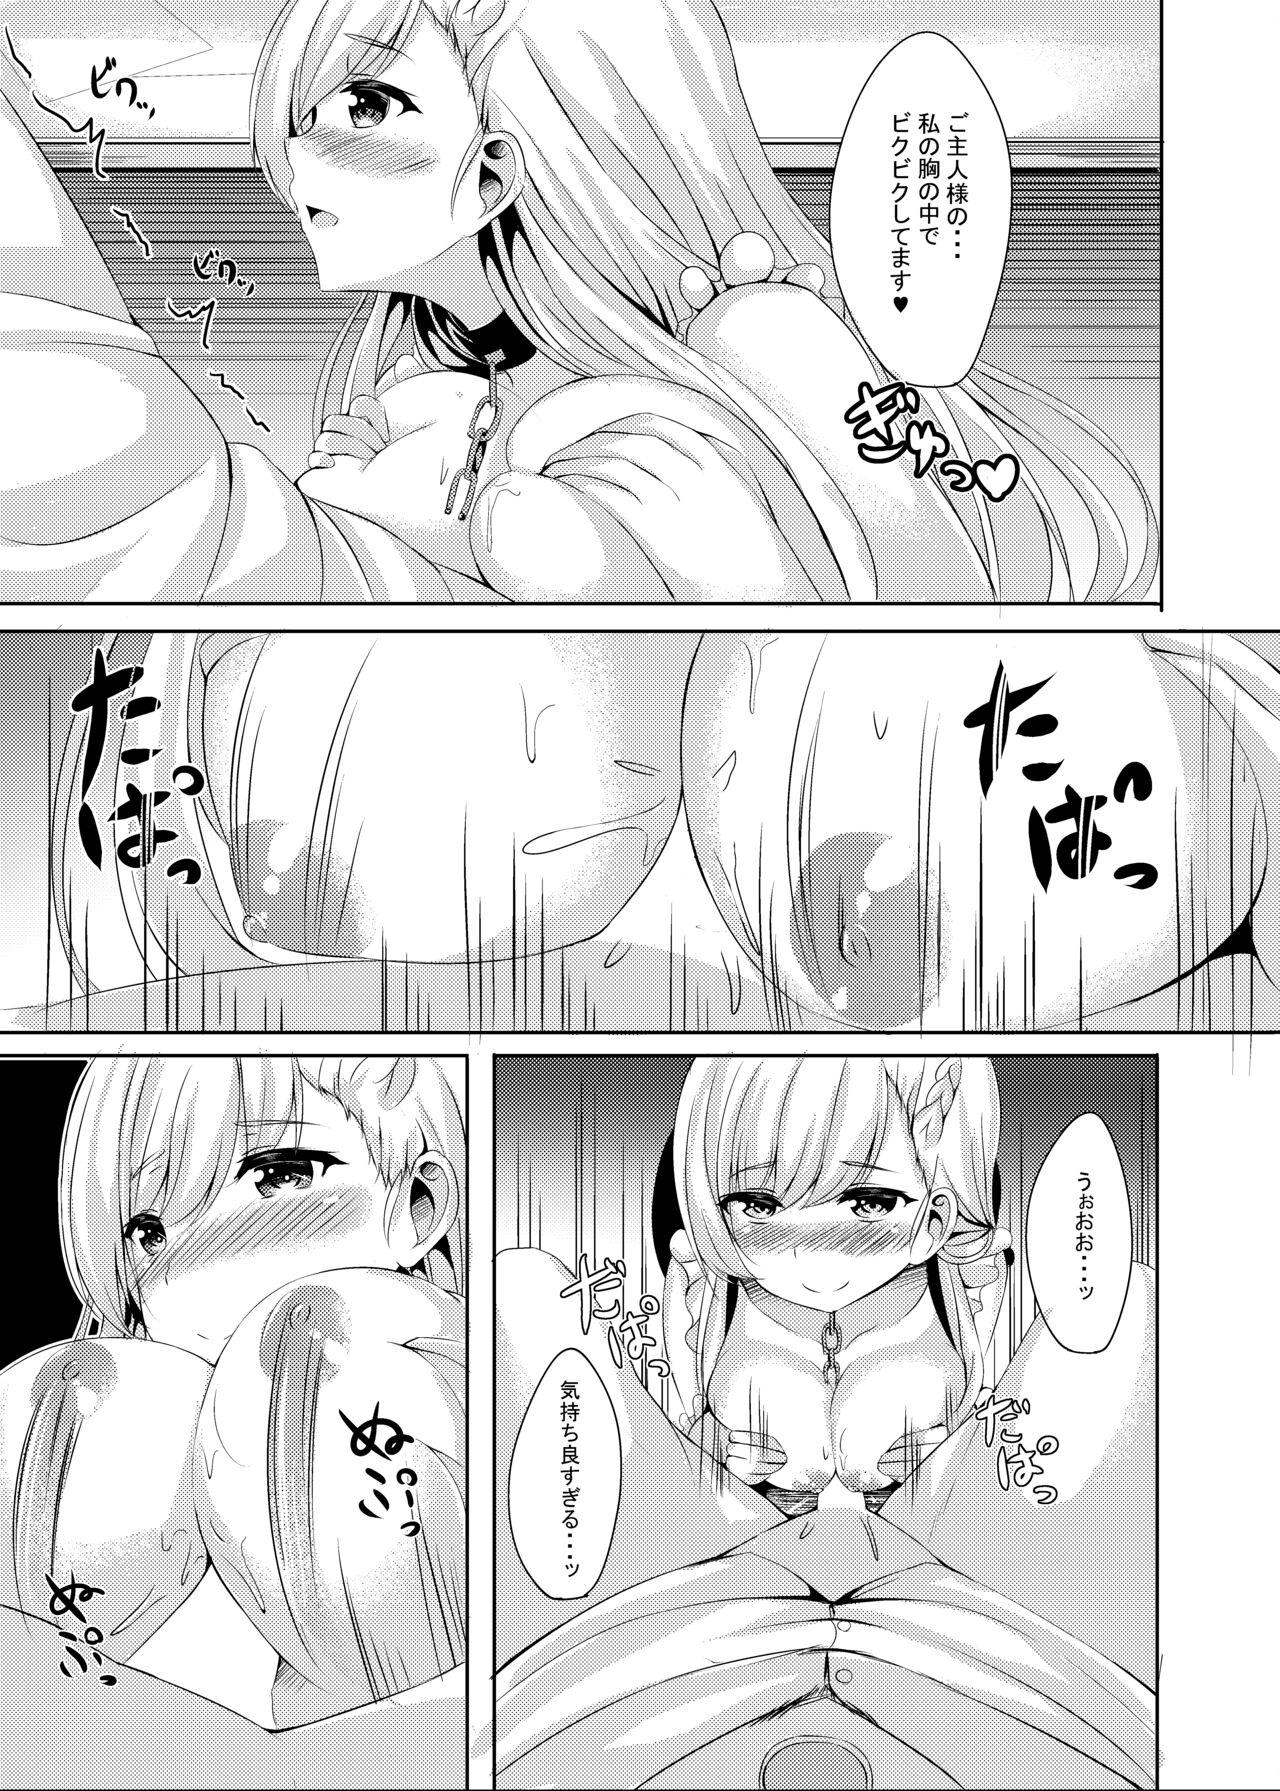 Foot Fetish ring the bell - Azur lane Str8 - Page 11